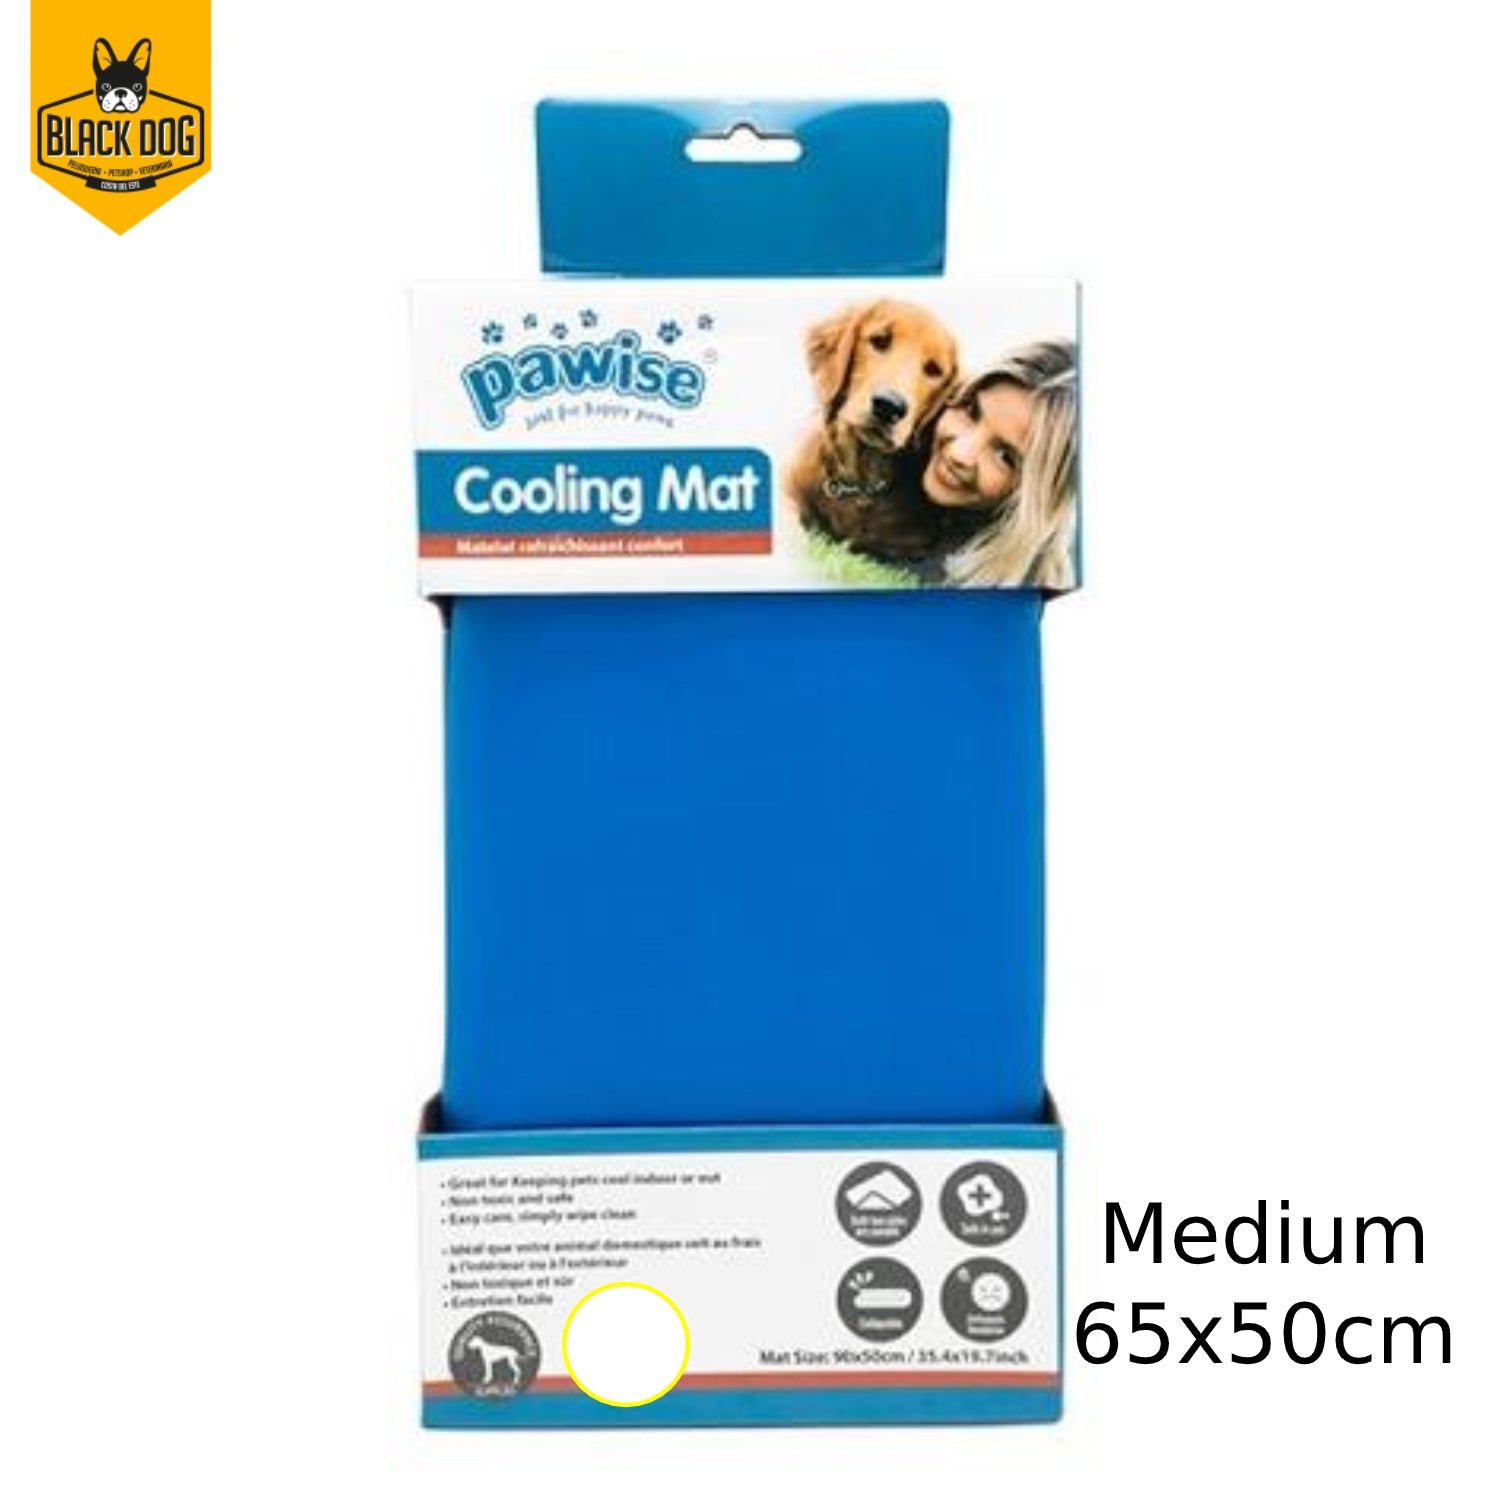 PAWISE, Cooling Mat, Small, Medium, Large